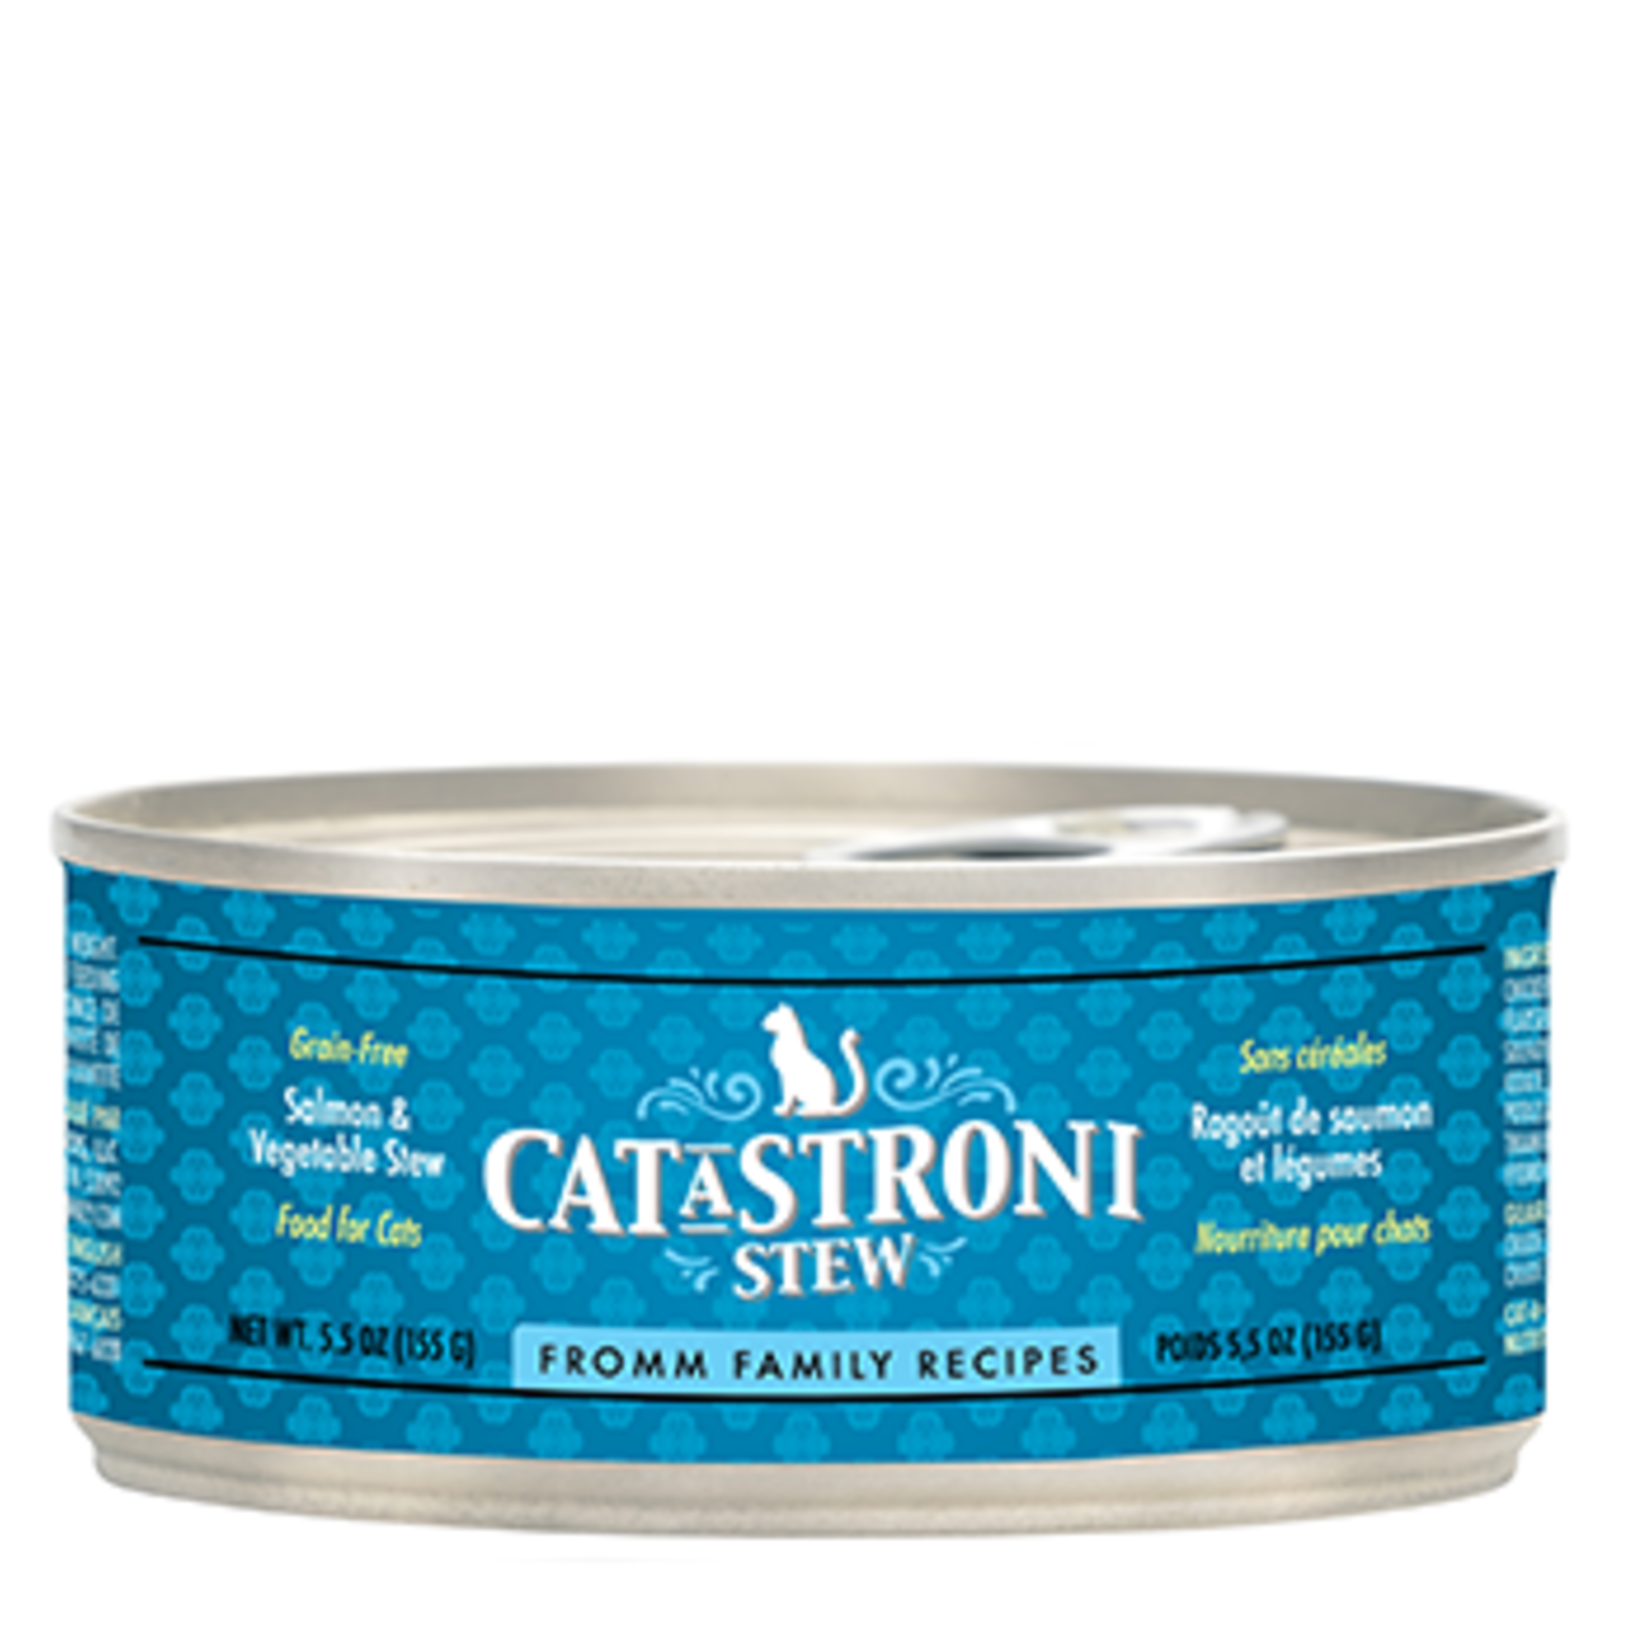 Fromm Salmon and Vegetable Stew - Cat-A-stroni - 5.5 oz